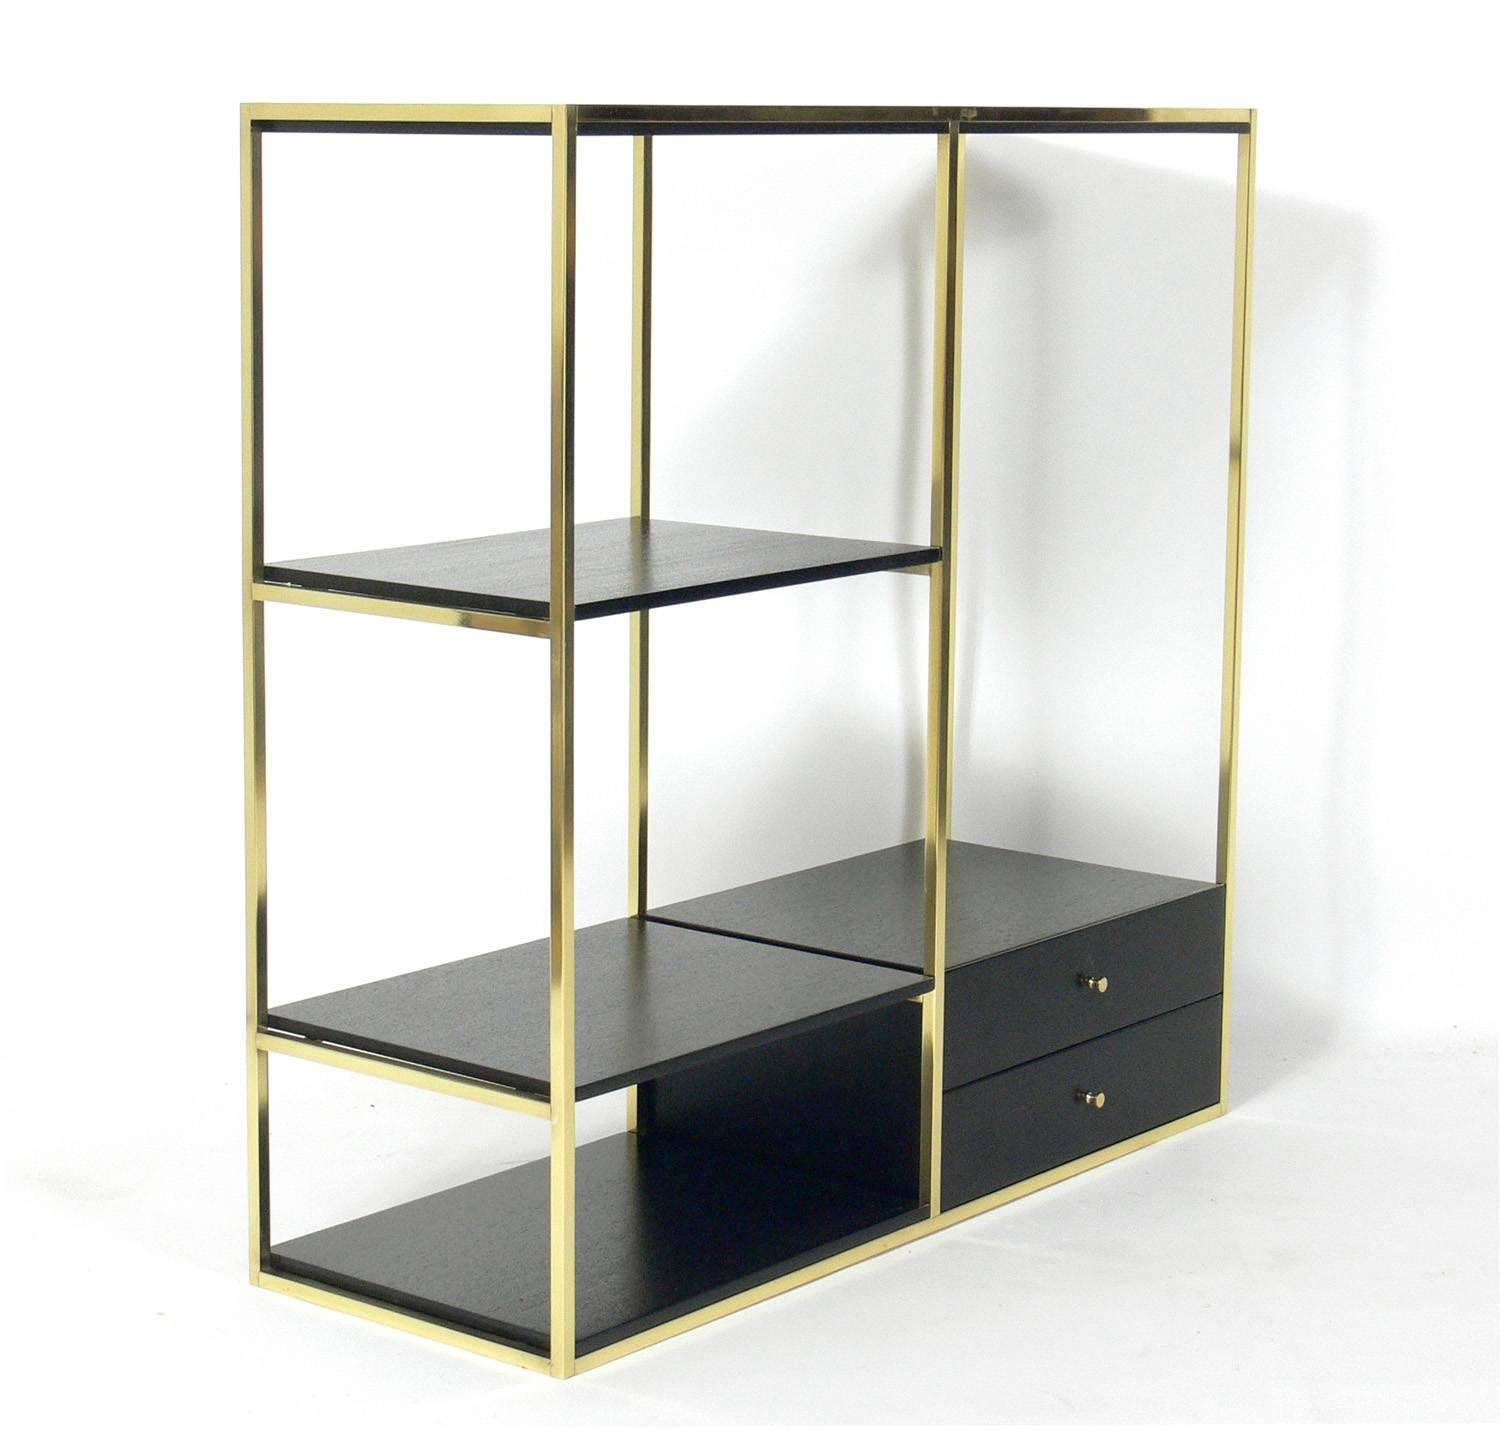 Mid-Century Modern vitrine shelves, designed by Paul McCobb for Calvin, American, circa 1950s. They have been completely restored in an ultra deep brown color with the brass hardware polished and lacquered. They are a versatile size and can be used